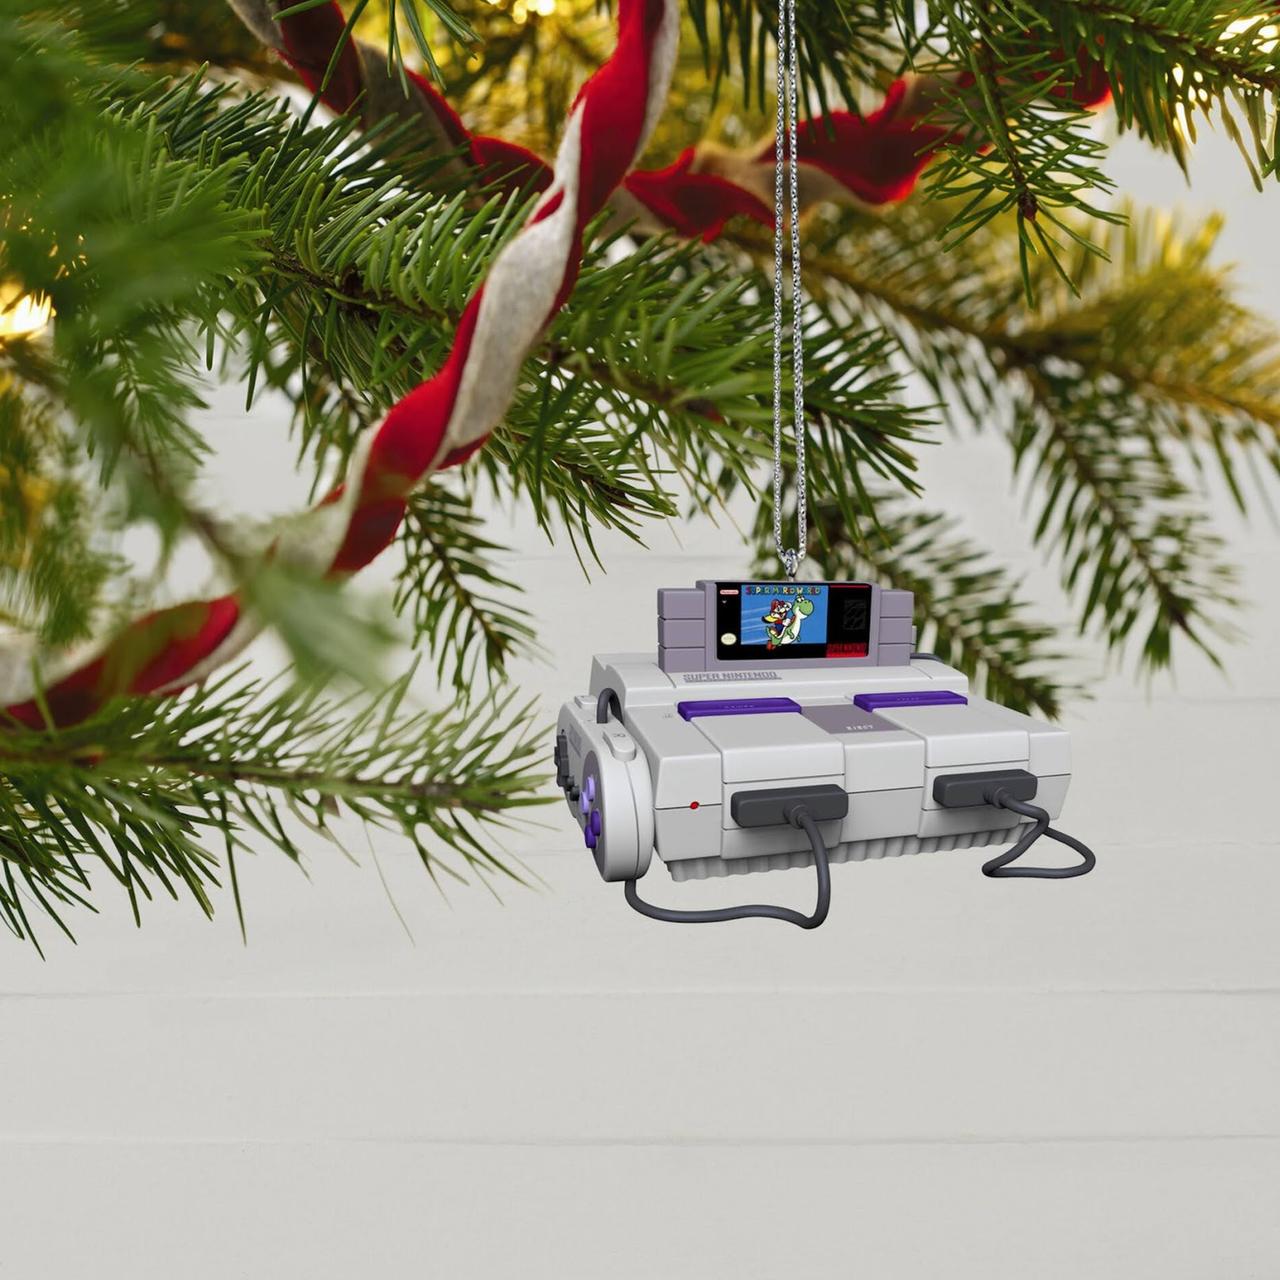 This SNES Christmas ornament is the perfect gamer gift!